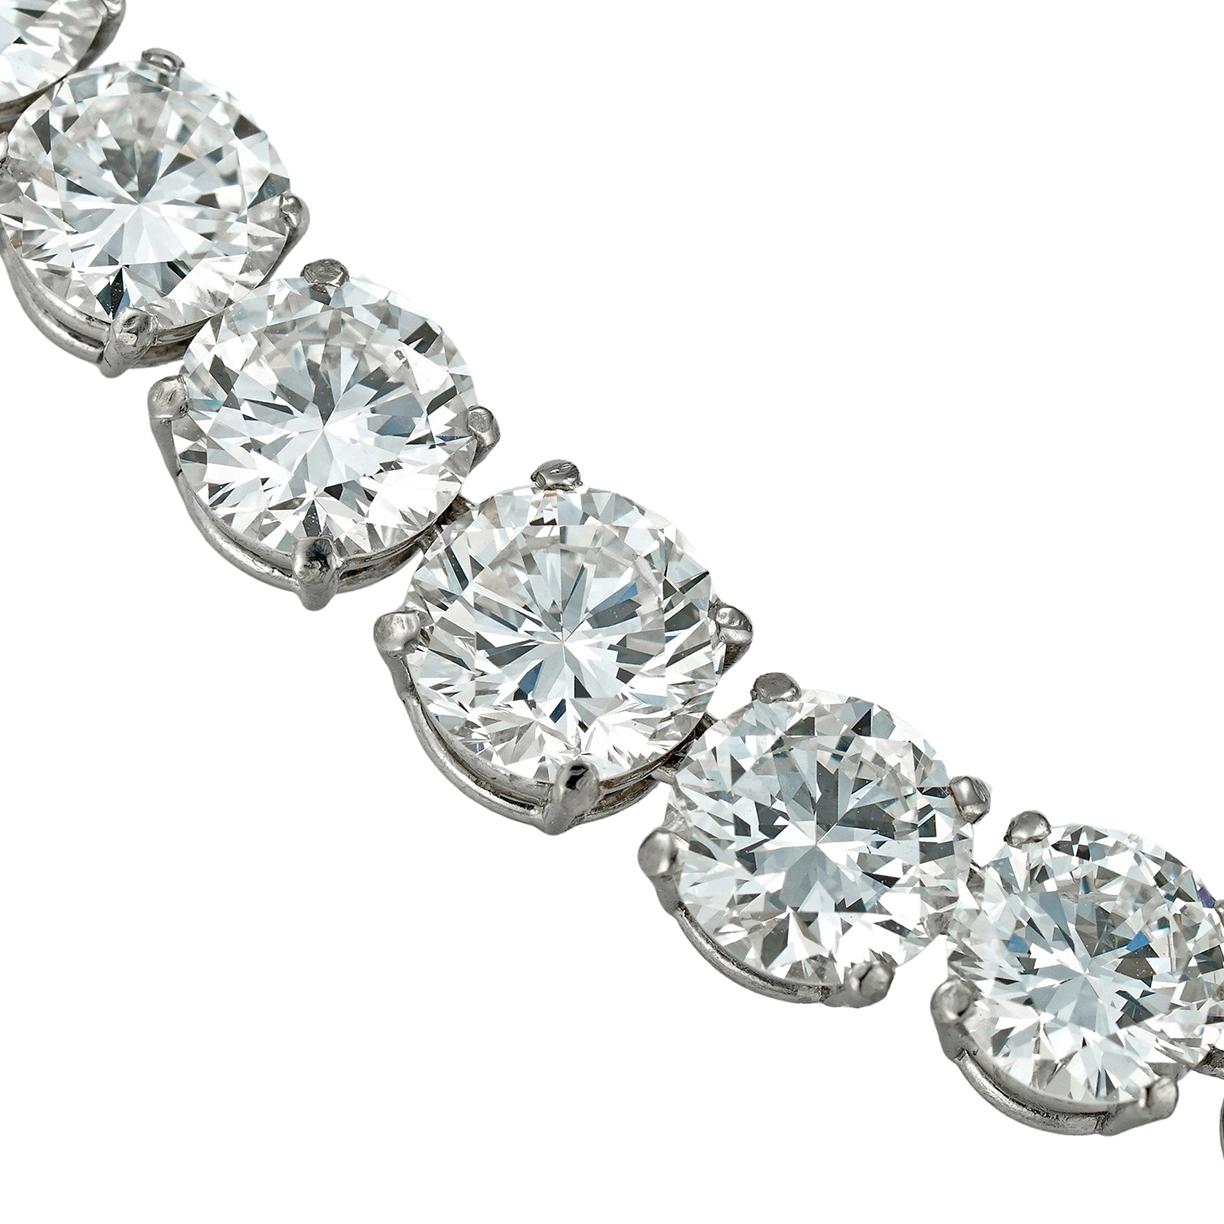 An Important diamond riviere necklace, the eighty-nine round brilliant-cut diamonds graduating from the centre, weighing approximately a total of 30.5 carats, the five larger diamonds, weighing 0.96, 1.16, 1.41, 1.15, and 0.99 carats, accompanied by